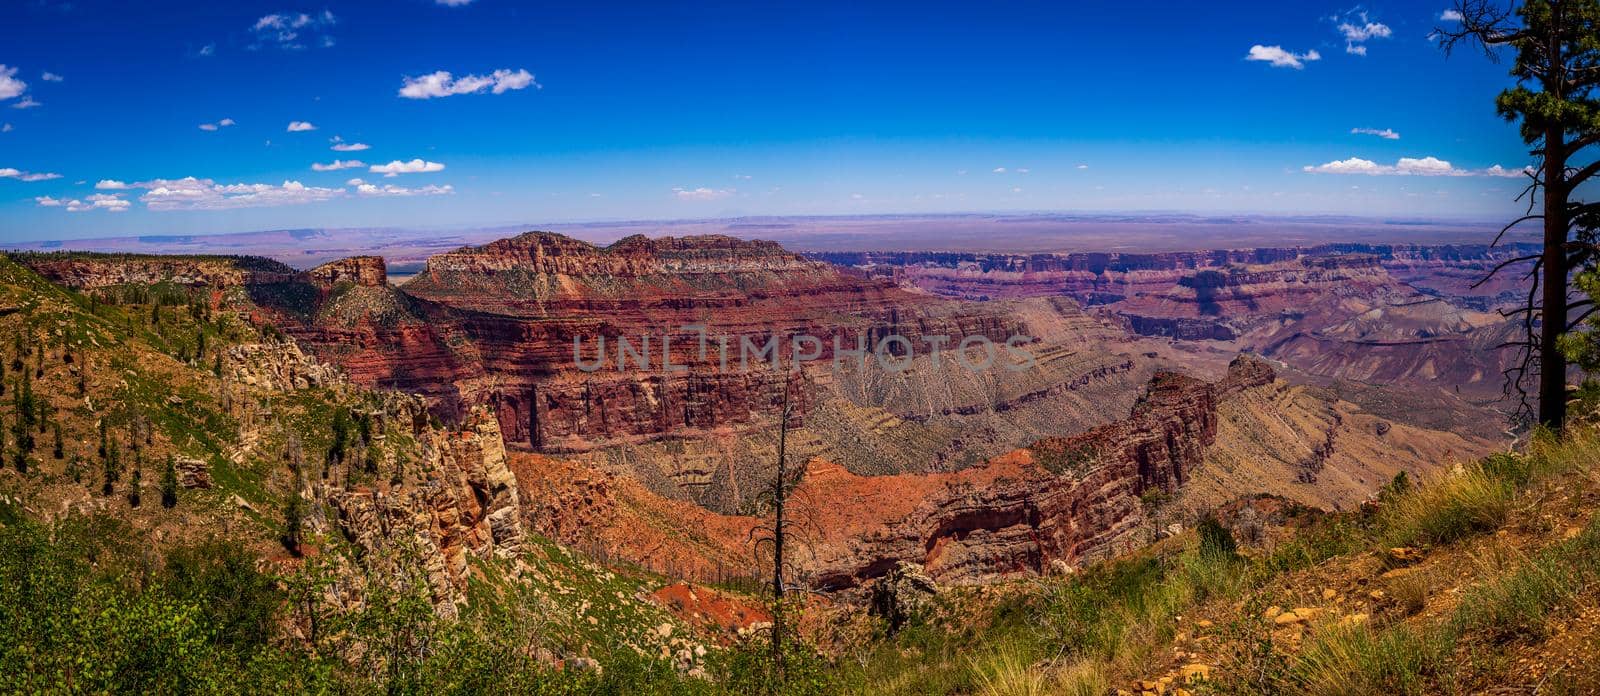 Grand Canyon National Park viewed from North Rim, at Point Imperial